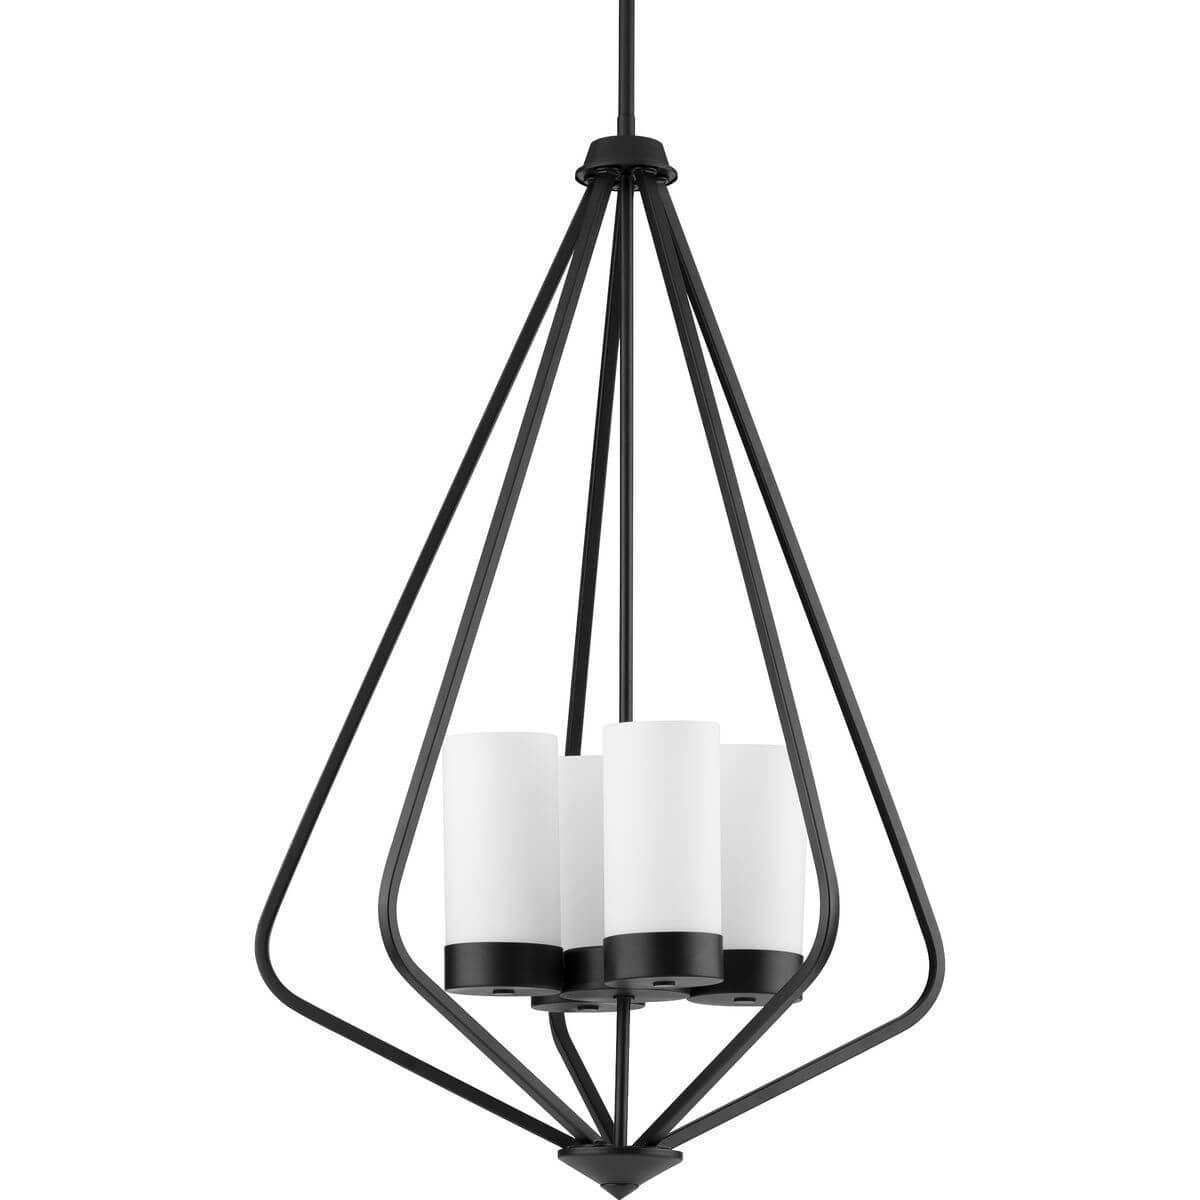 Progress Lighting Elevate 4 Light 20 inch Foyer Pendant in Matte Black with Etched Painted White Inside Glass P500305-031